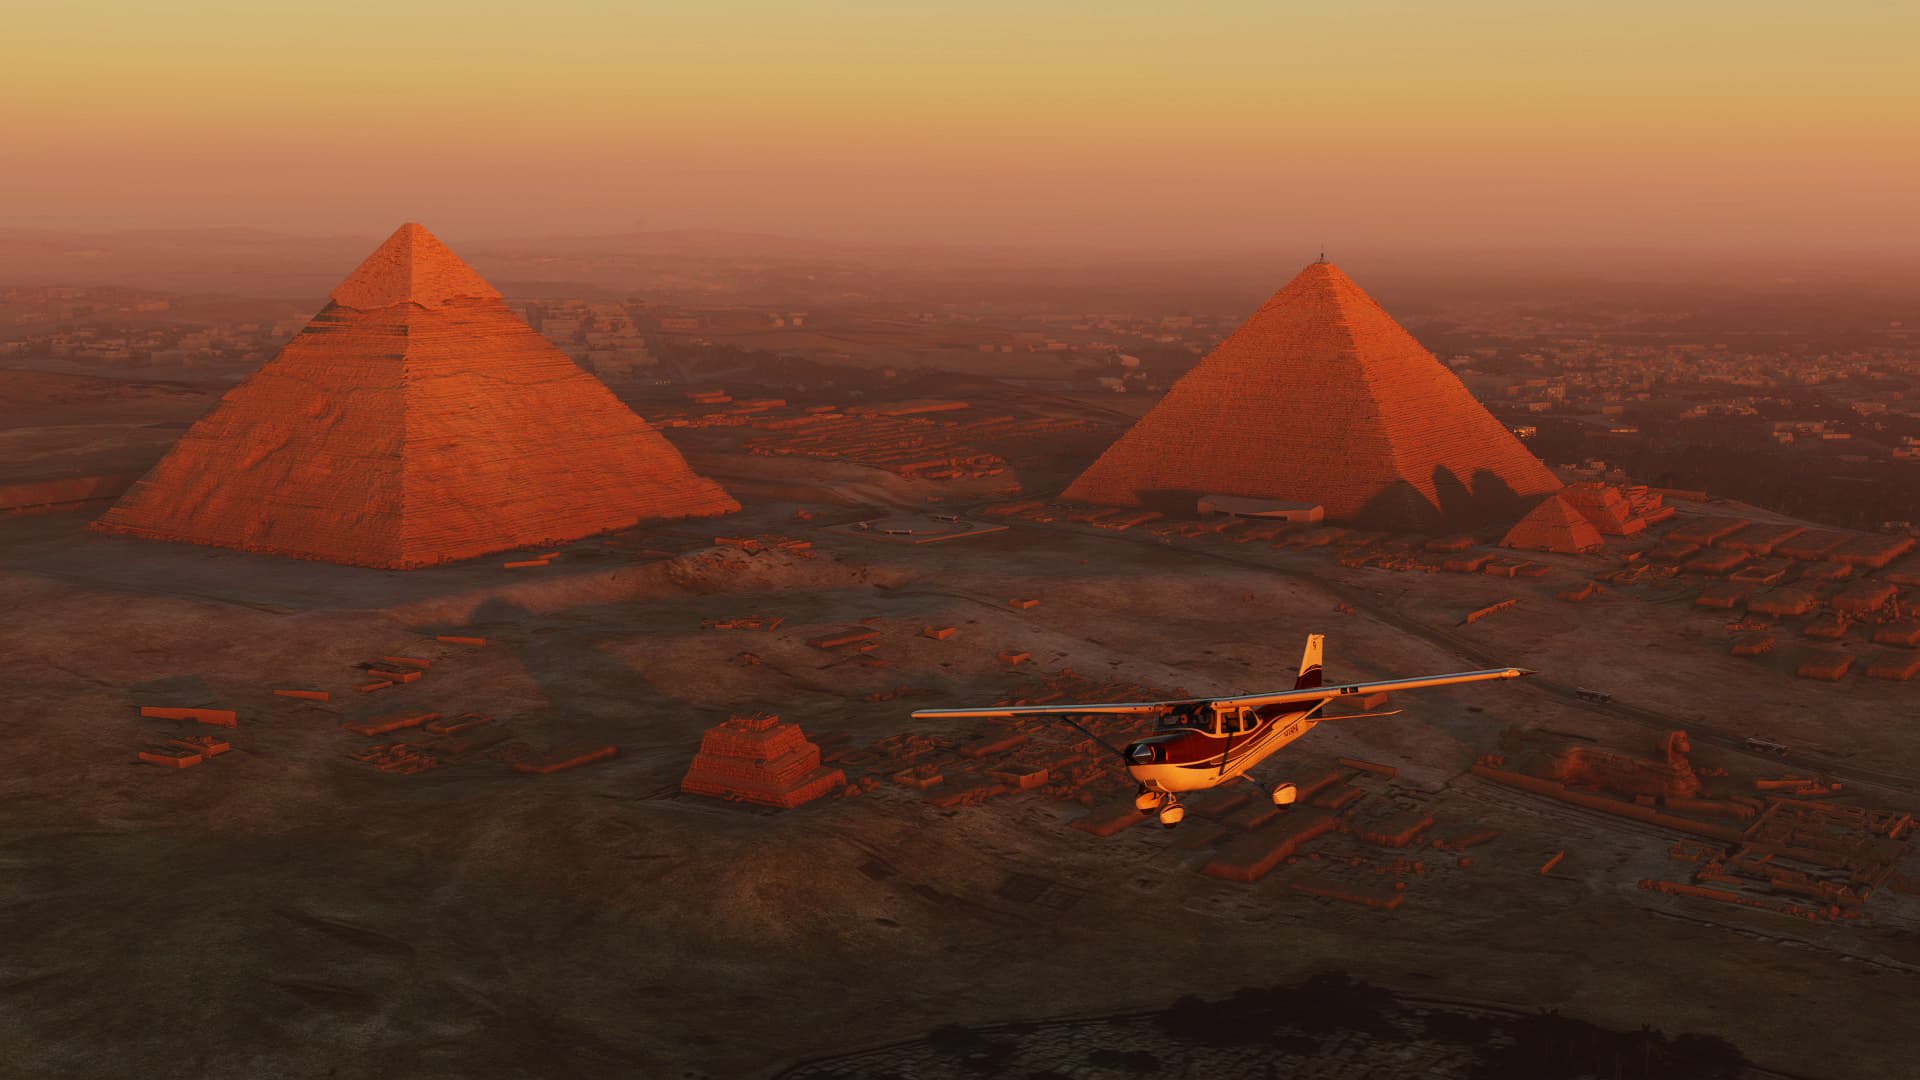 A Cessna 172 banks right over the Pyramids of Giza, Egypt at sunset